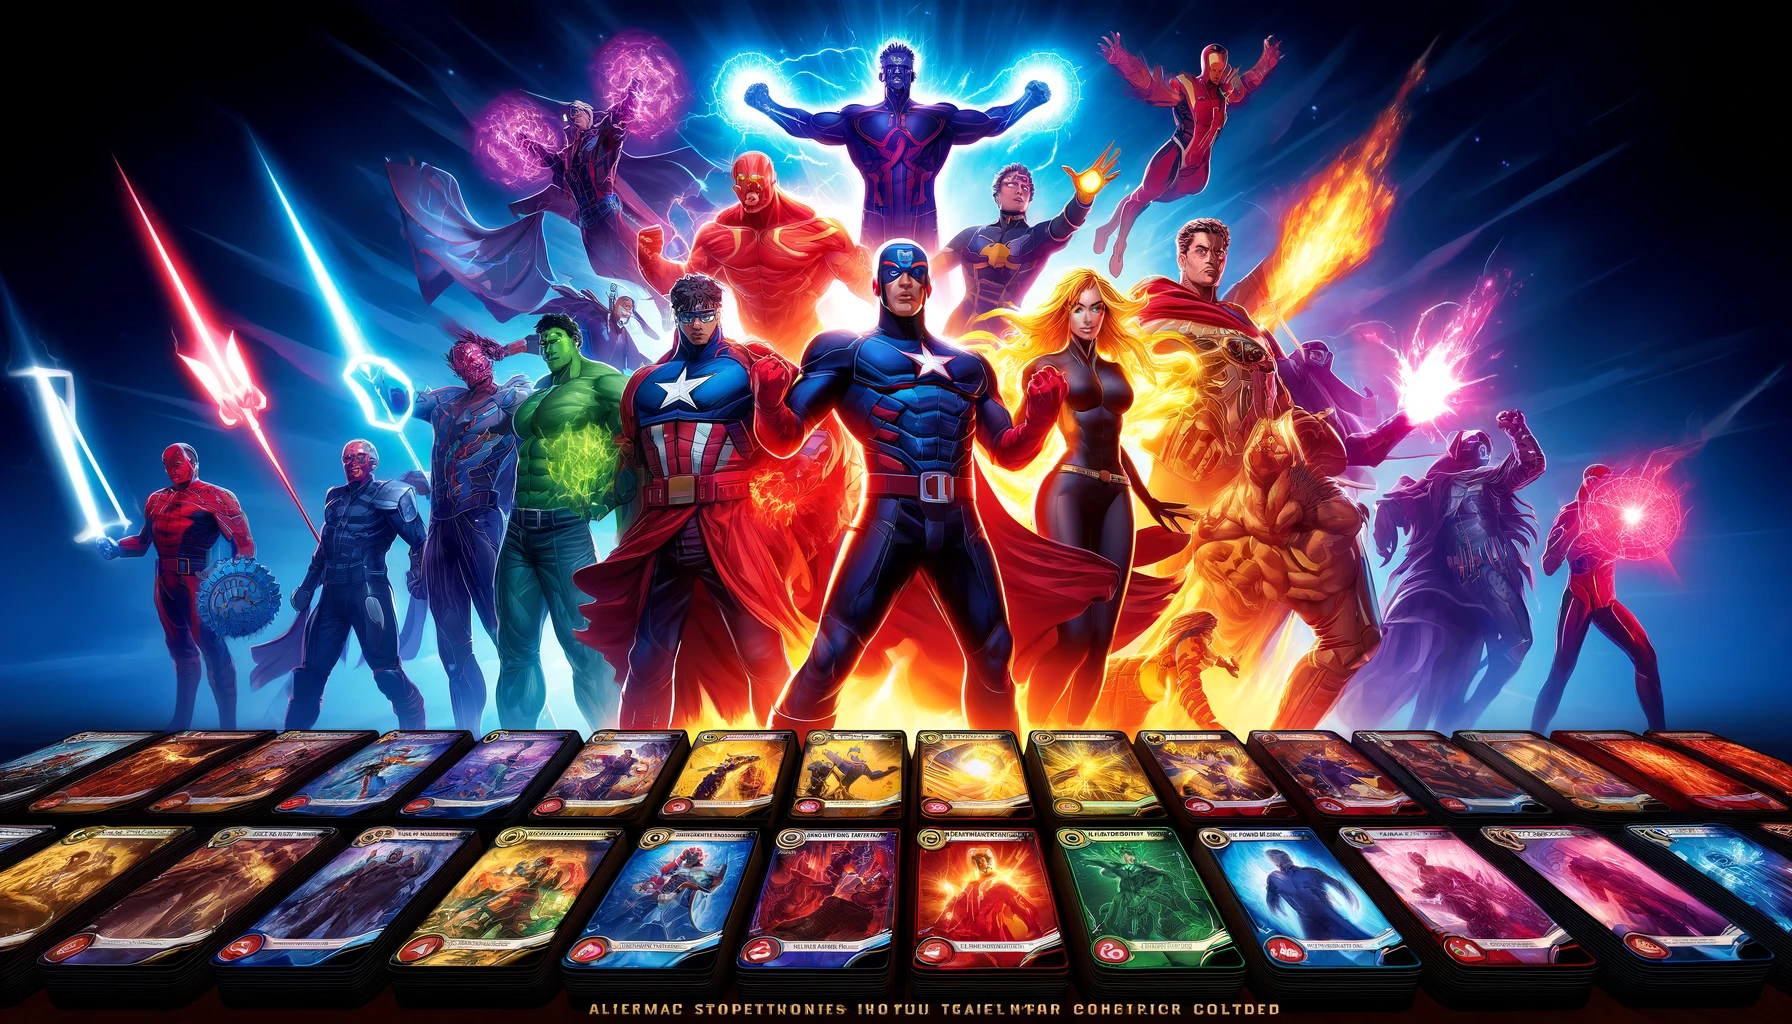 Superheroes and villains stand triumphantly, glowing with energy and surrounded by Marvel cards in vivid colors, symbolizing a perfect card collection and deck. The scene conveys strategic mastery and success, highlighting the player's progress and accomplishments.